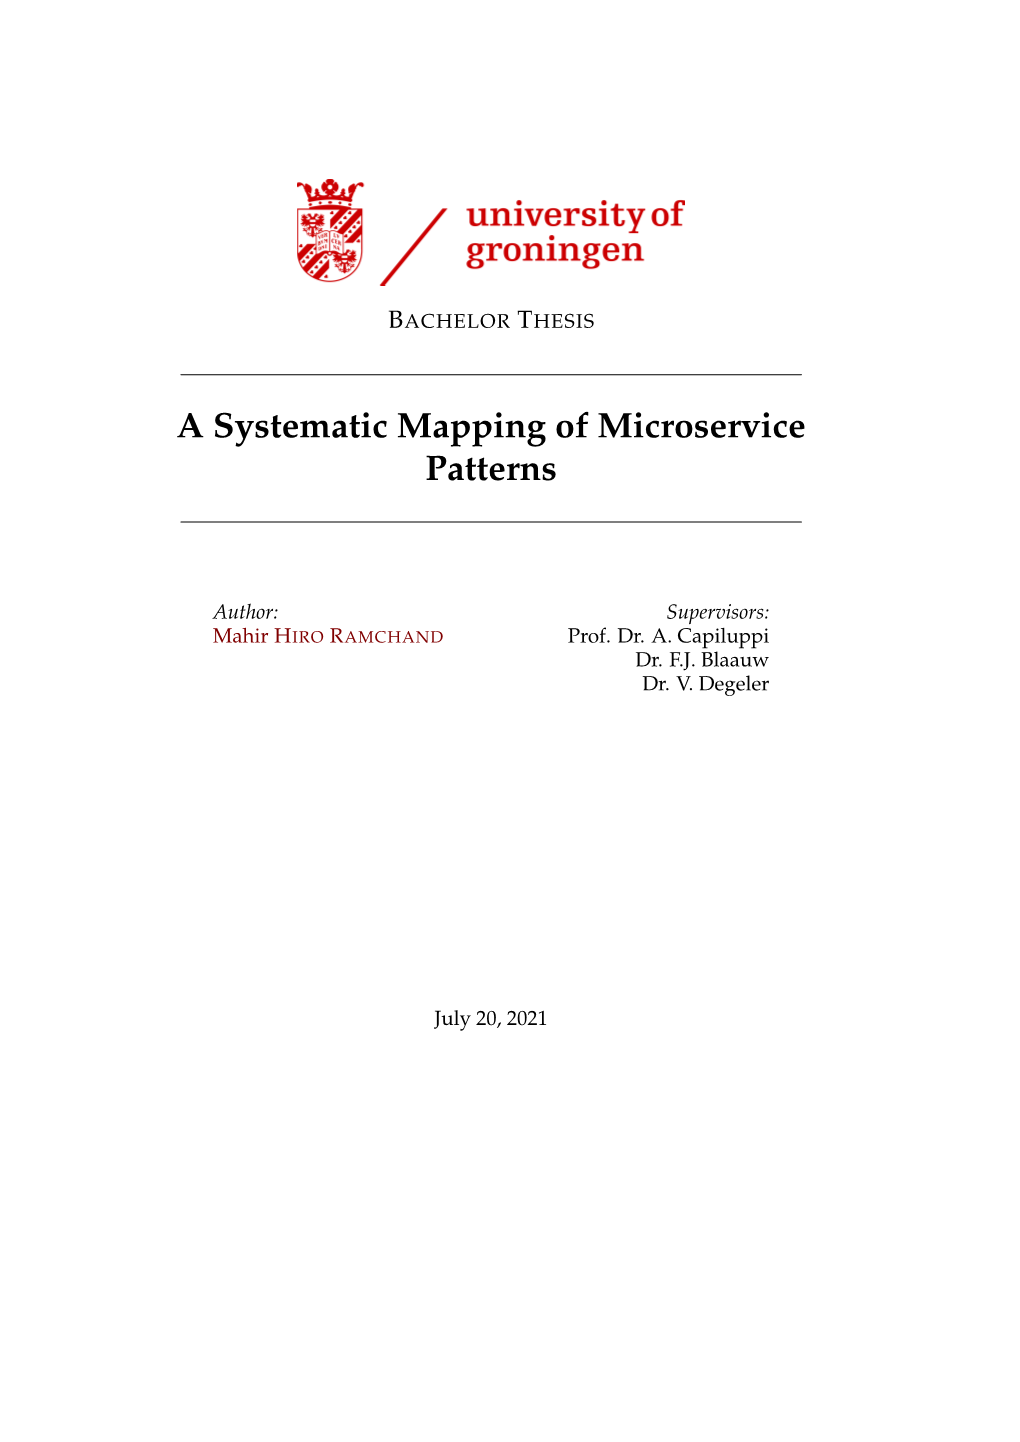 A Systematic Mapping of Microservice Patterns